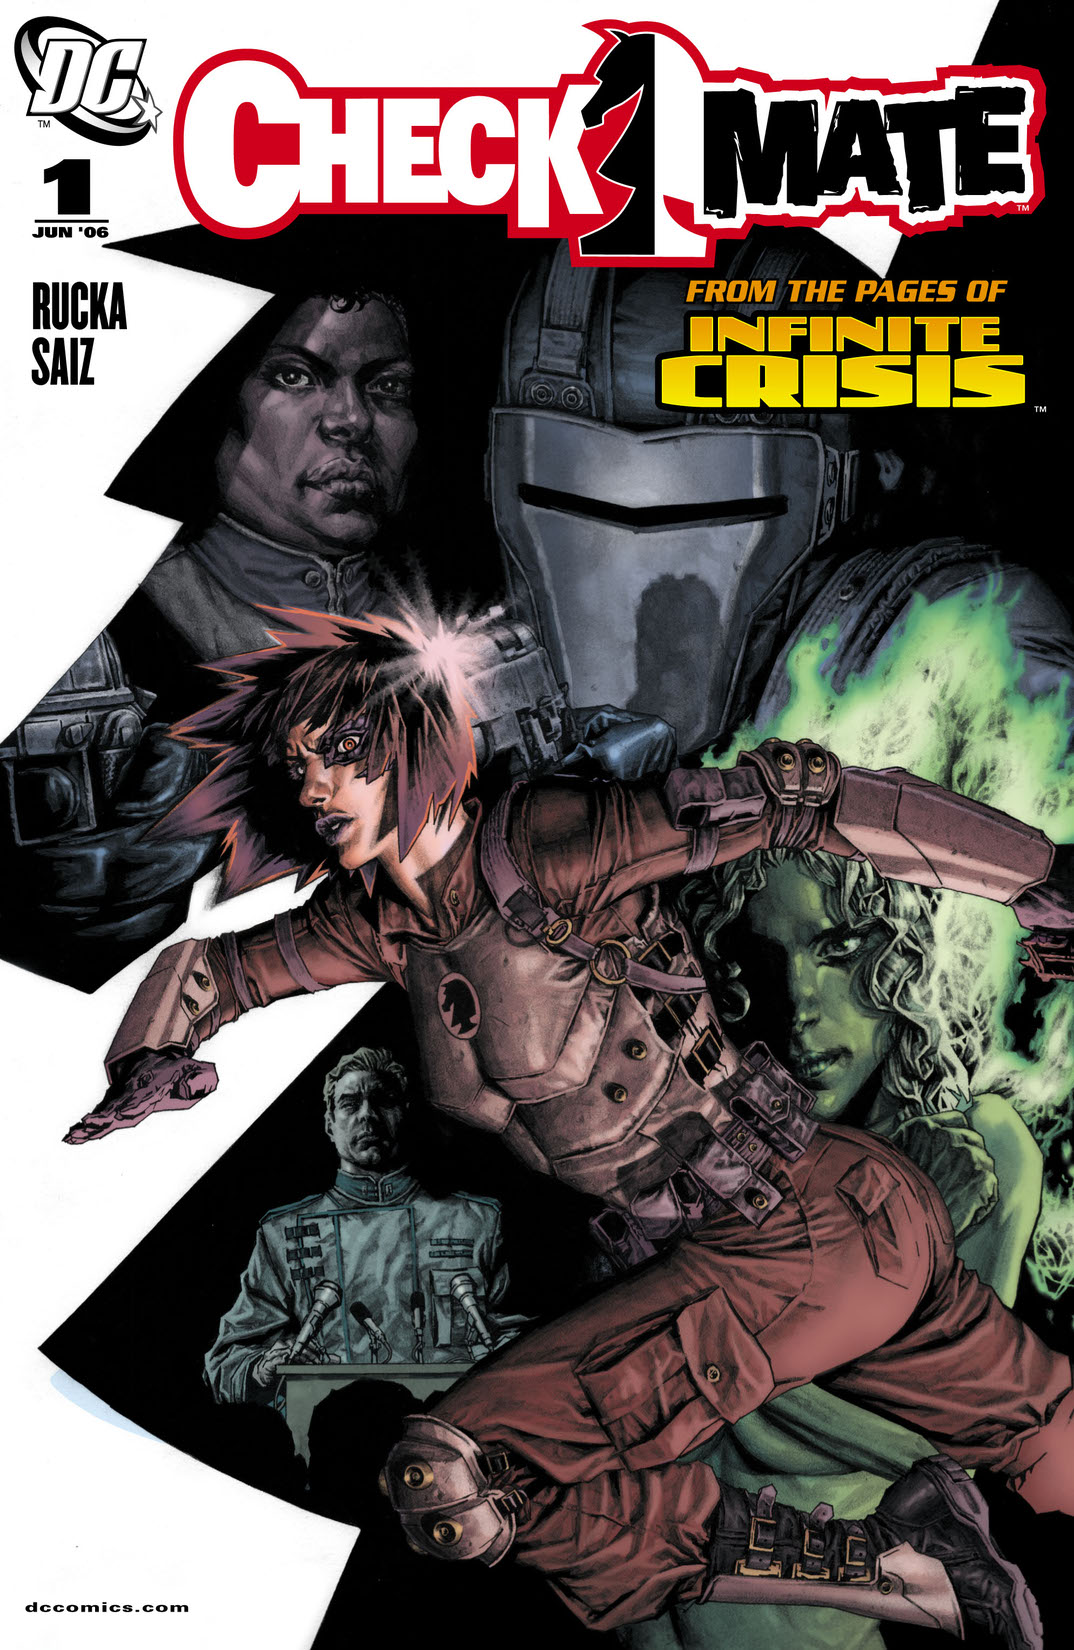 Checkmate (2006-) #1 preview images